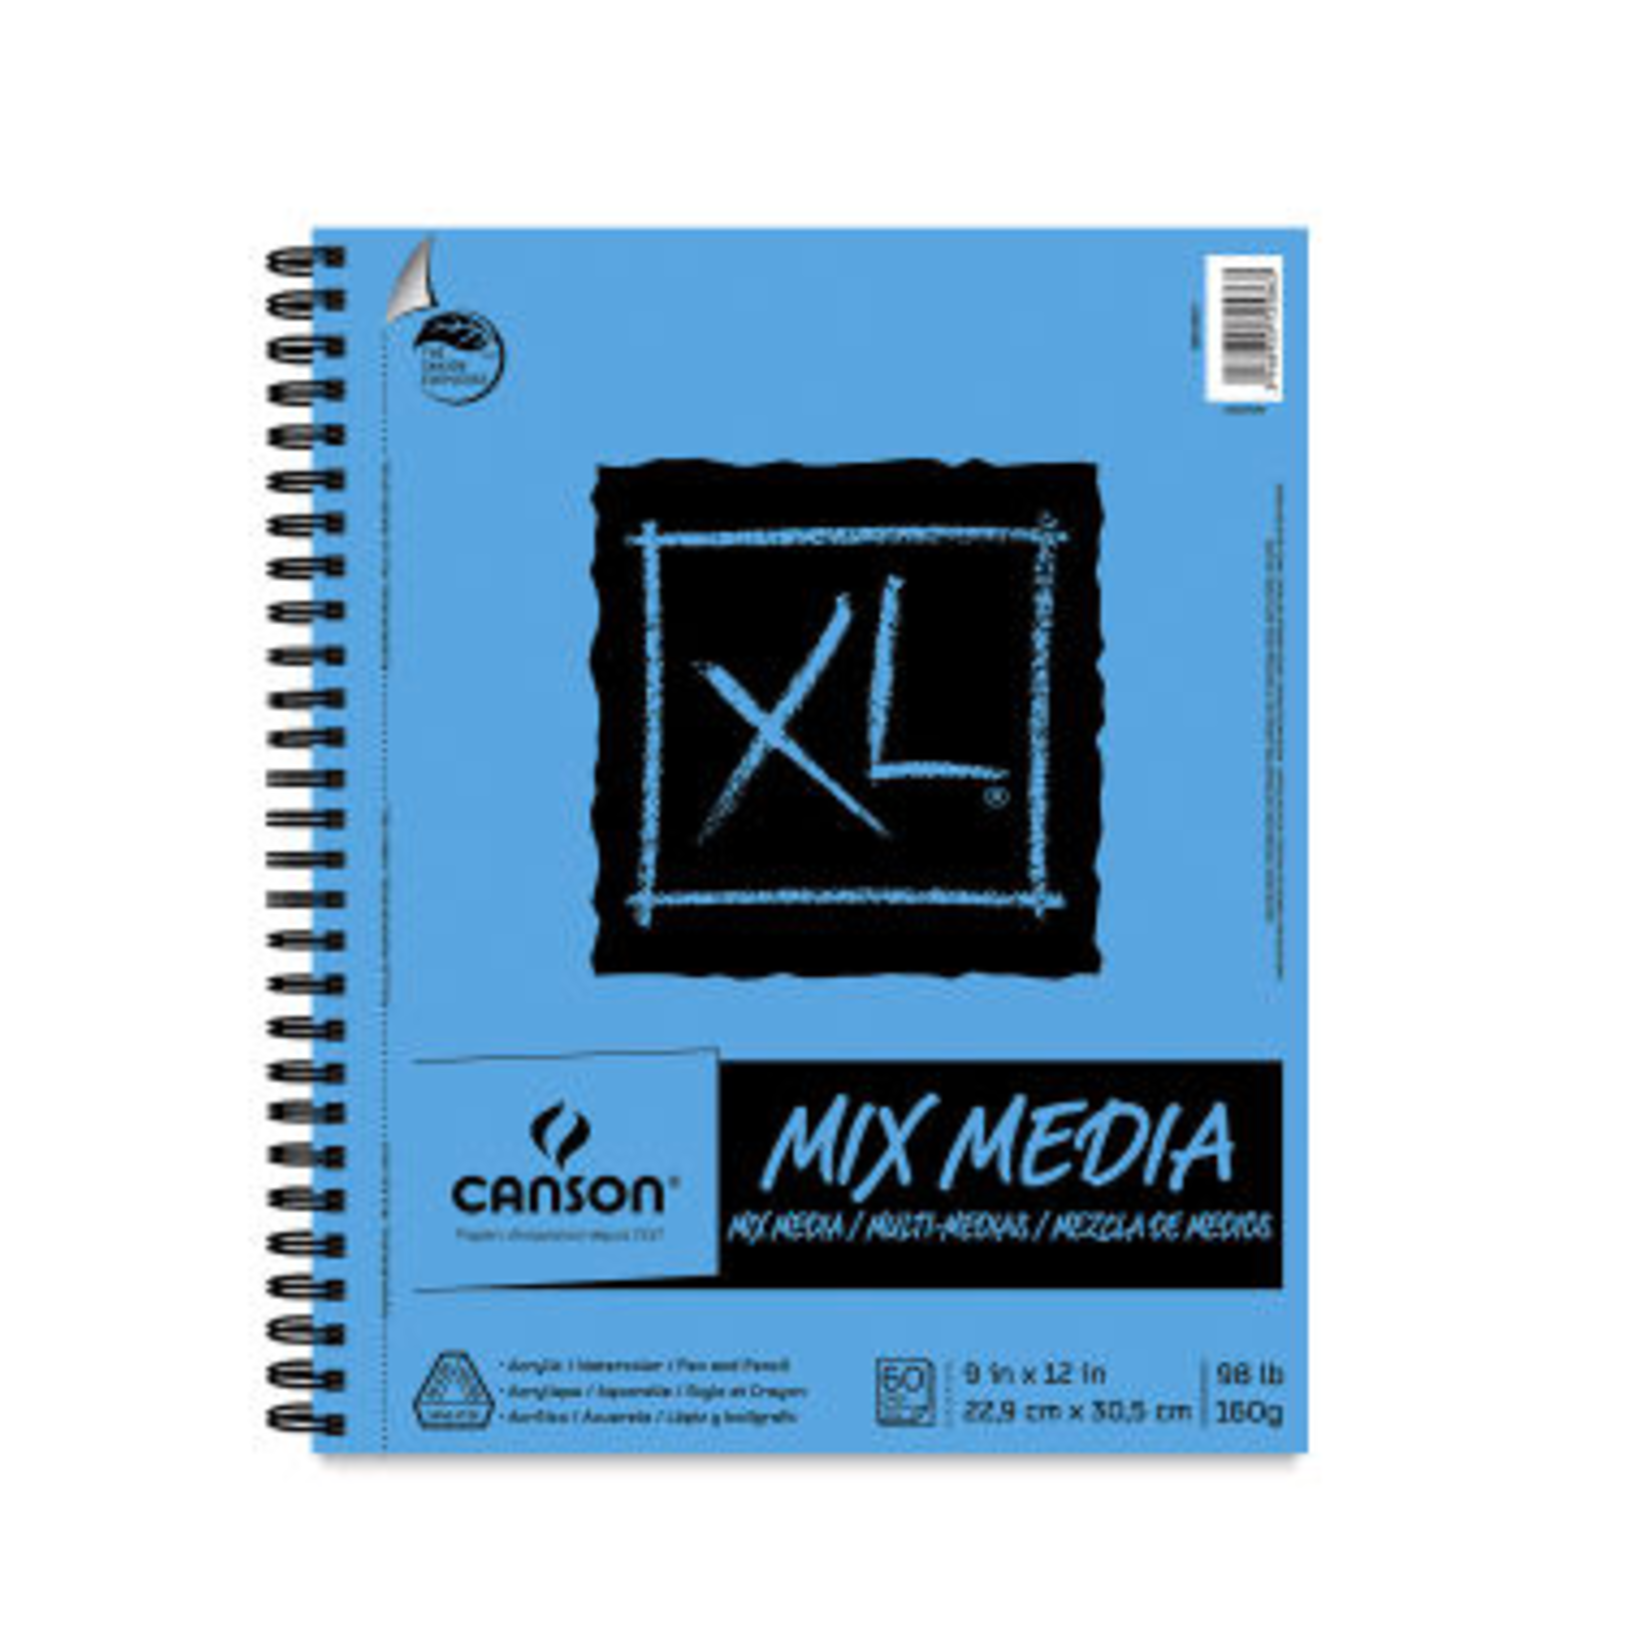 CANSON CANSON XL MIX MEDIA PAD 98LB SIDE COIL  60/SHT 9x12